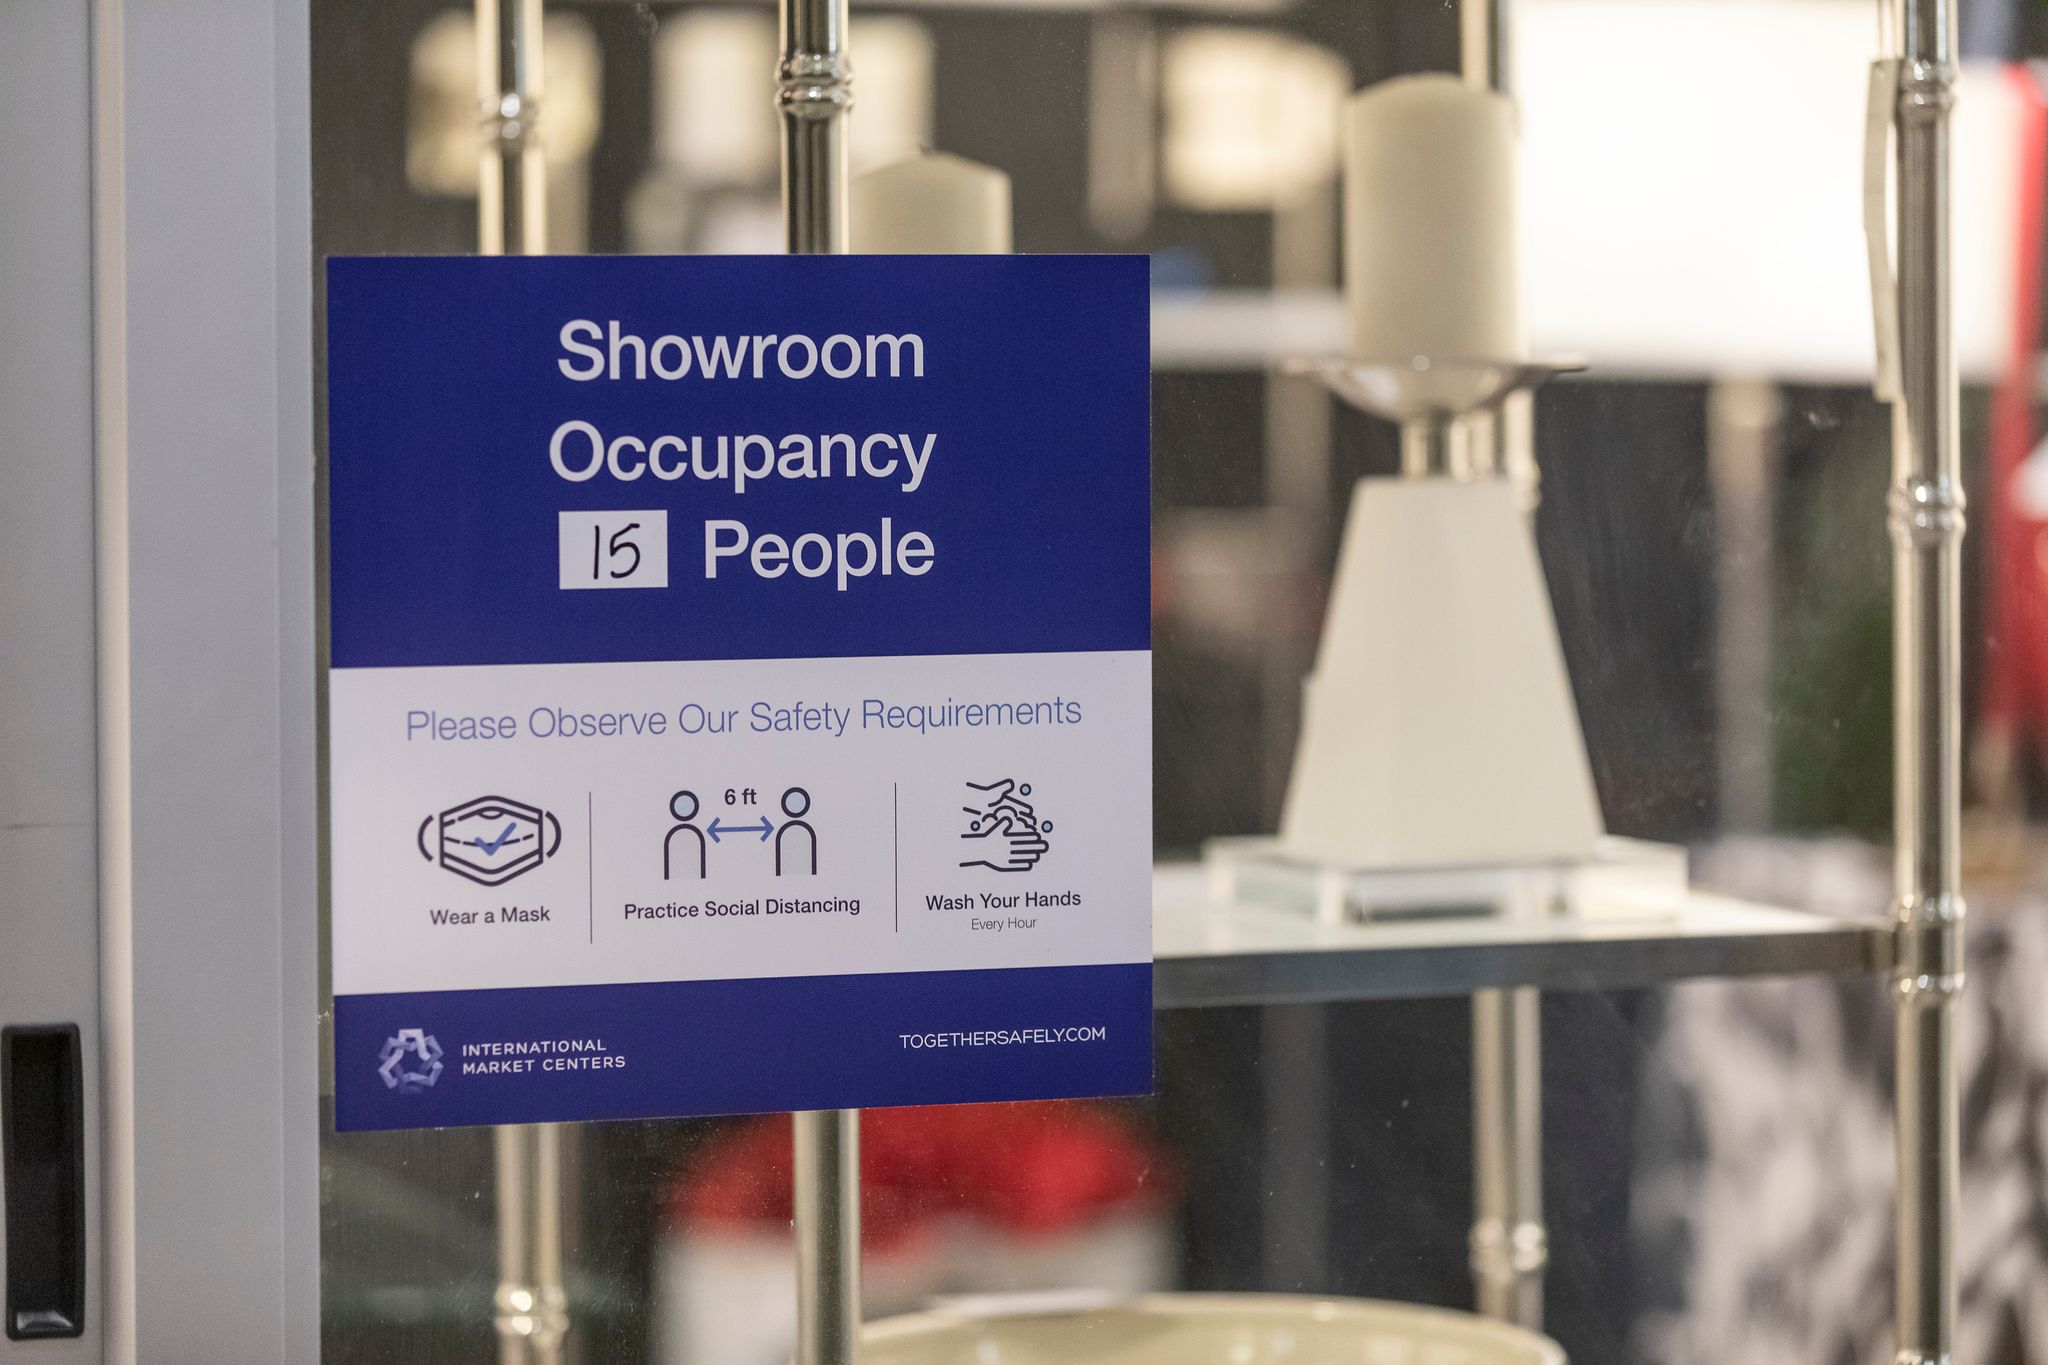 A sign that says "Showroom Occupancy 15 People" hangs on a glass door.